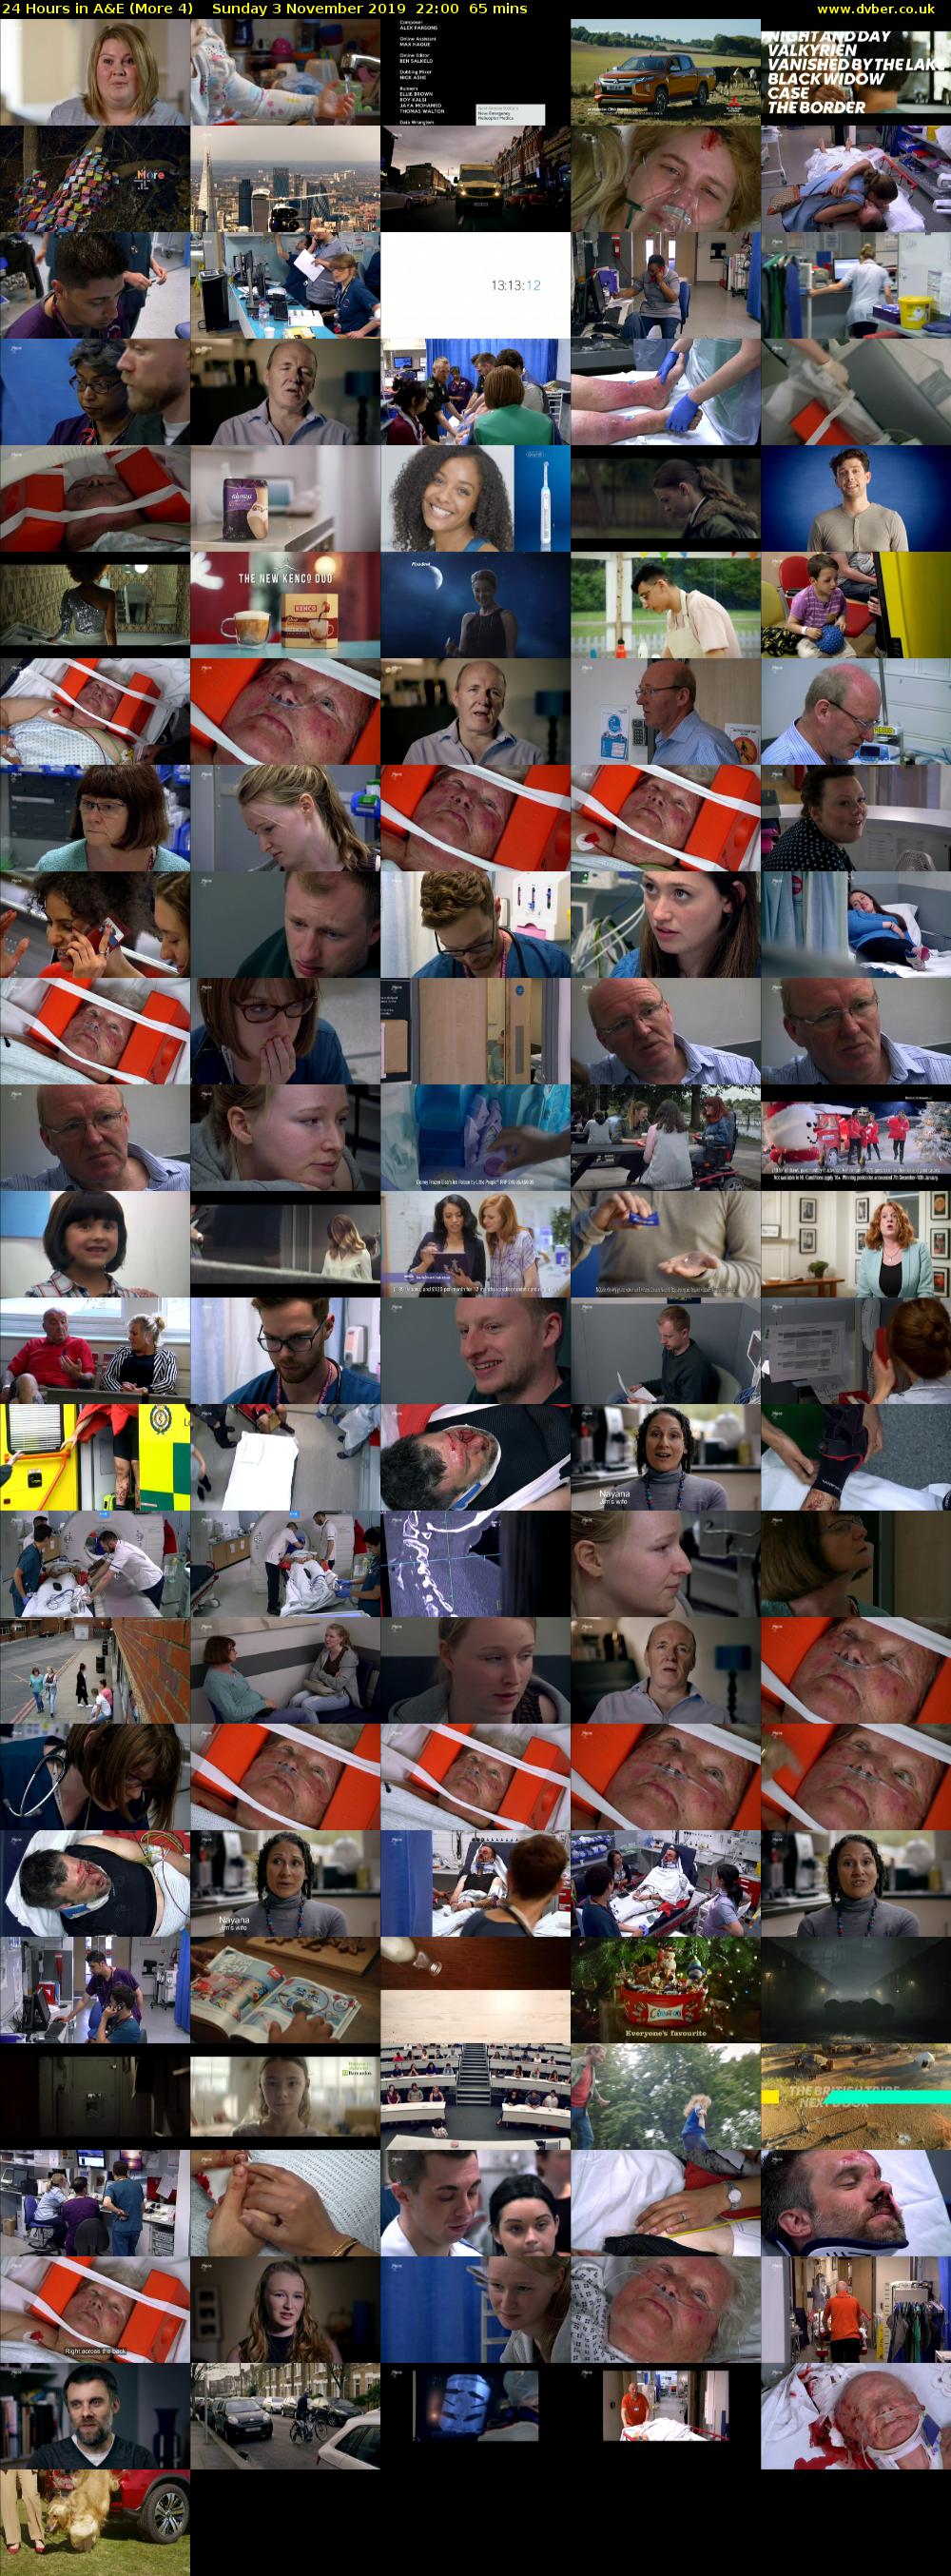 24 Hours in A&E (More 4) Sunday 3 November 2019 22:00 - 23:05